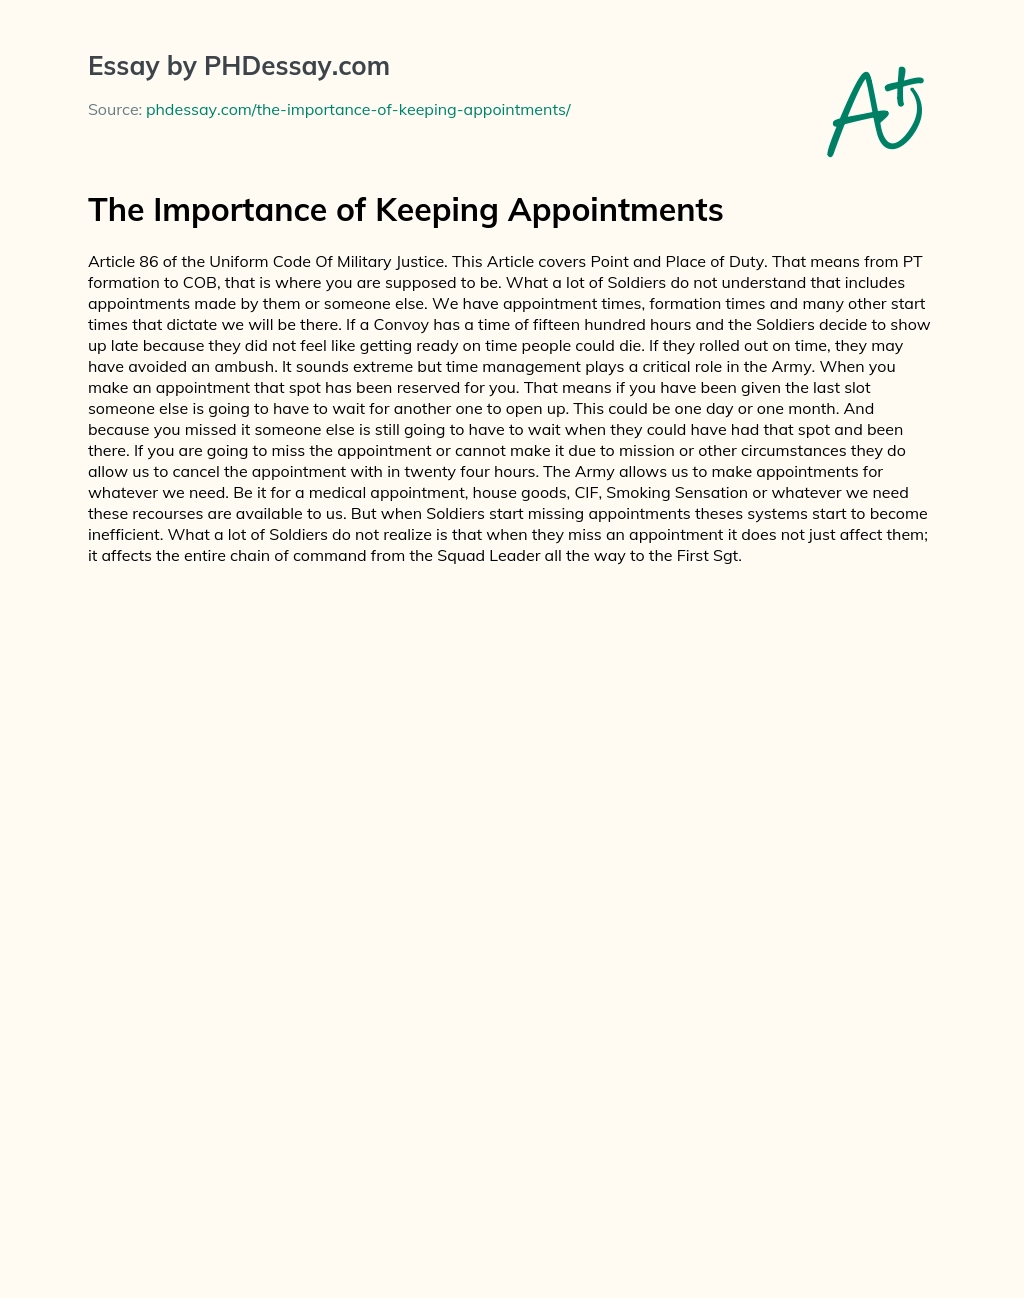 The Importance of Keeping Appointments essay